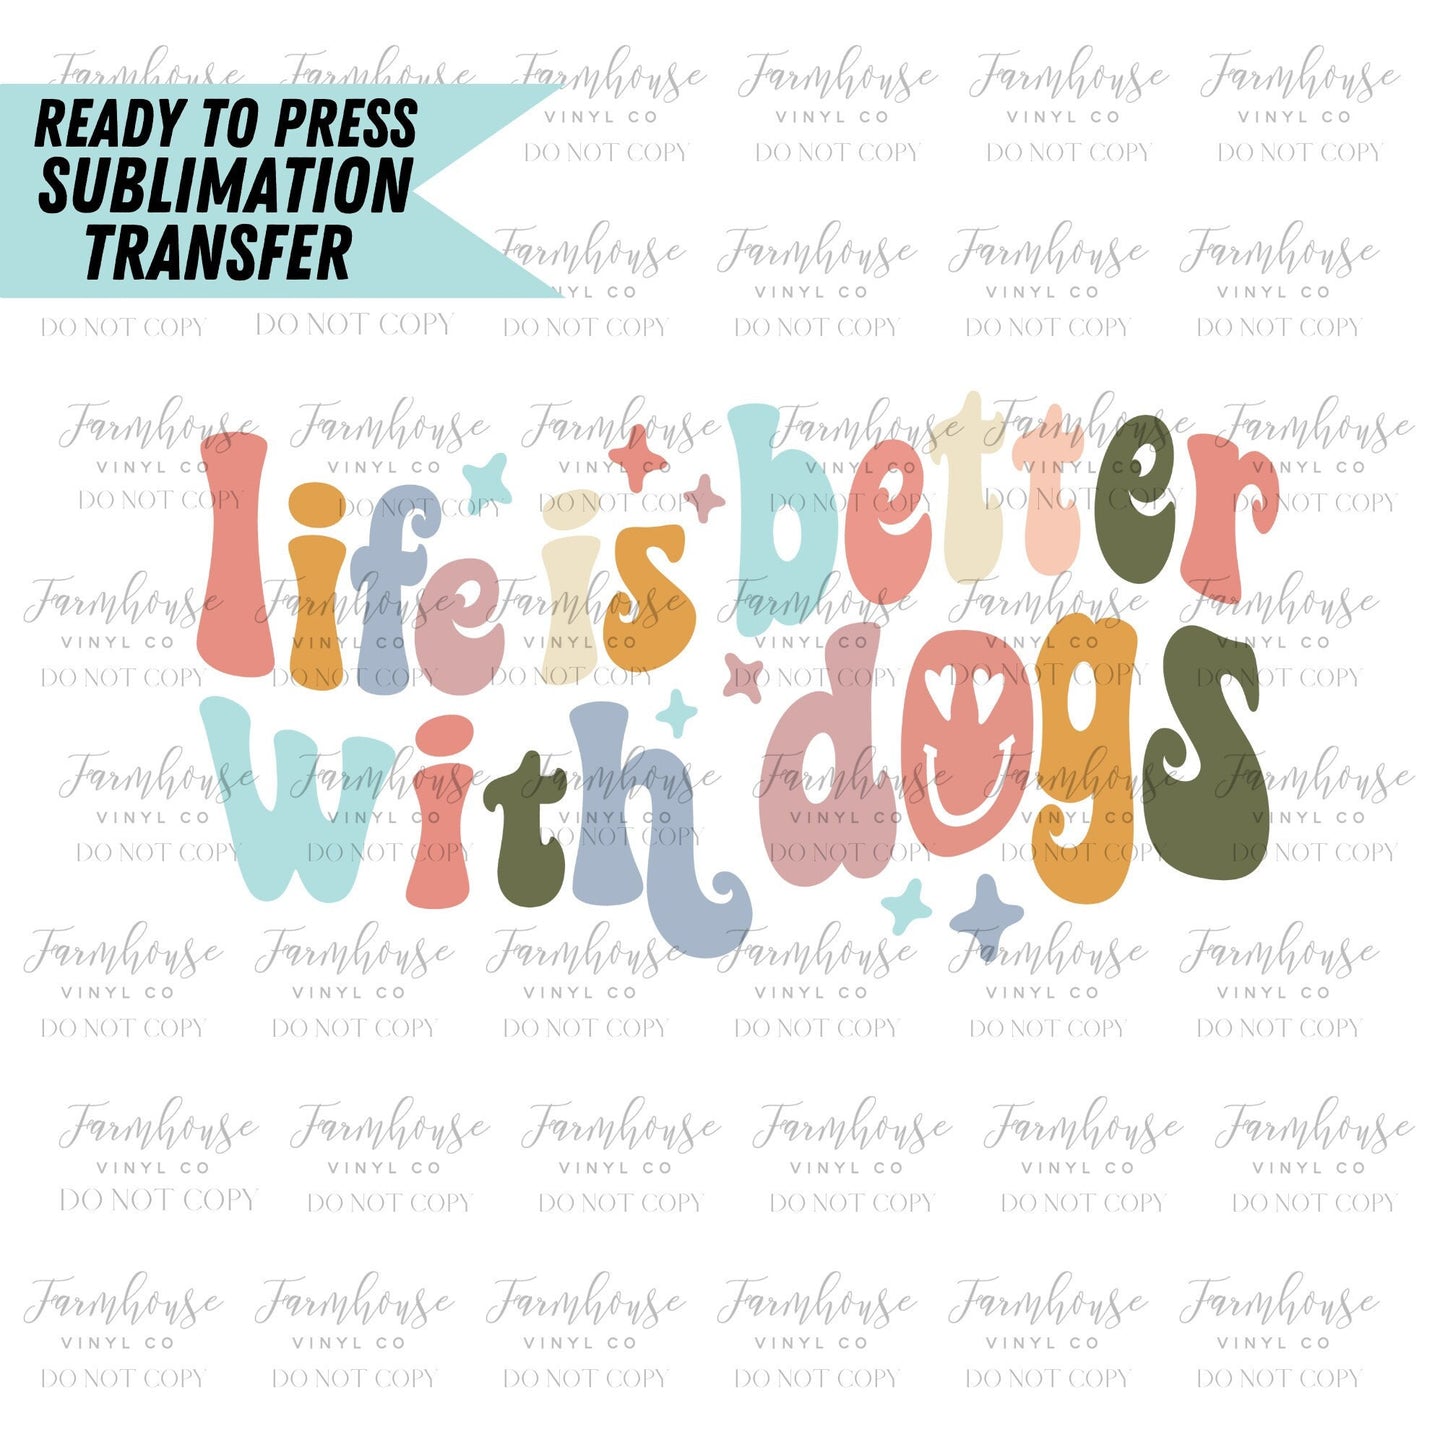 Life is Better with Dogs,  Ready to Press Sublimation Transfer, Sublimation Transfers, Heat Transfer, Dog Mama Design, Dog Parent, Dog Lover - Farmhouse Vinyl Co